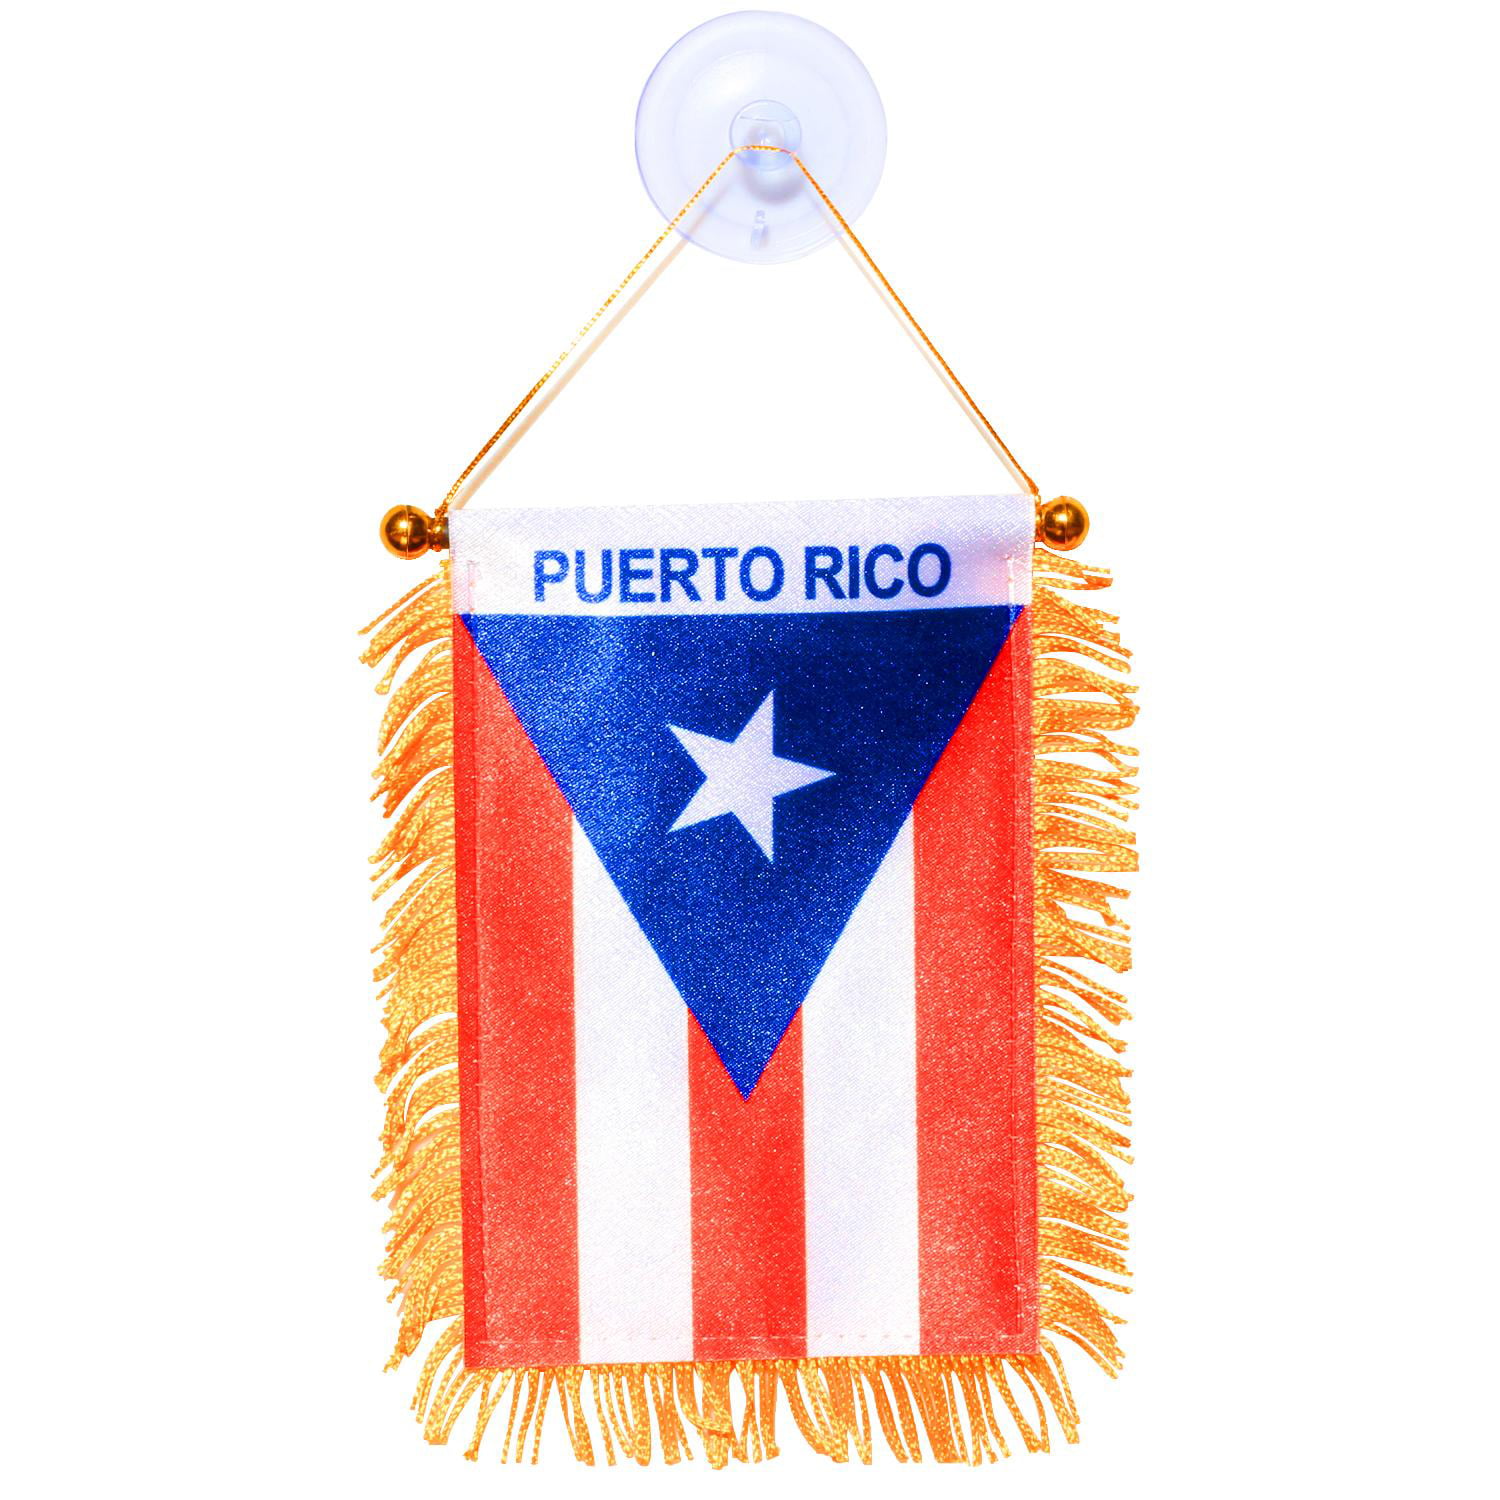 PUERTO RICO MINI BANNER FLAG GREAT FOR CAR WINDOW MIRROR HANGING 2 SIDED Red 